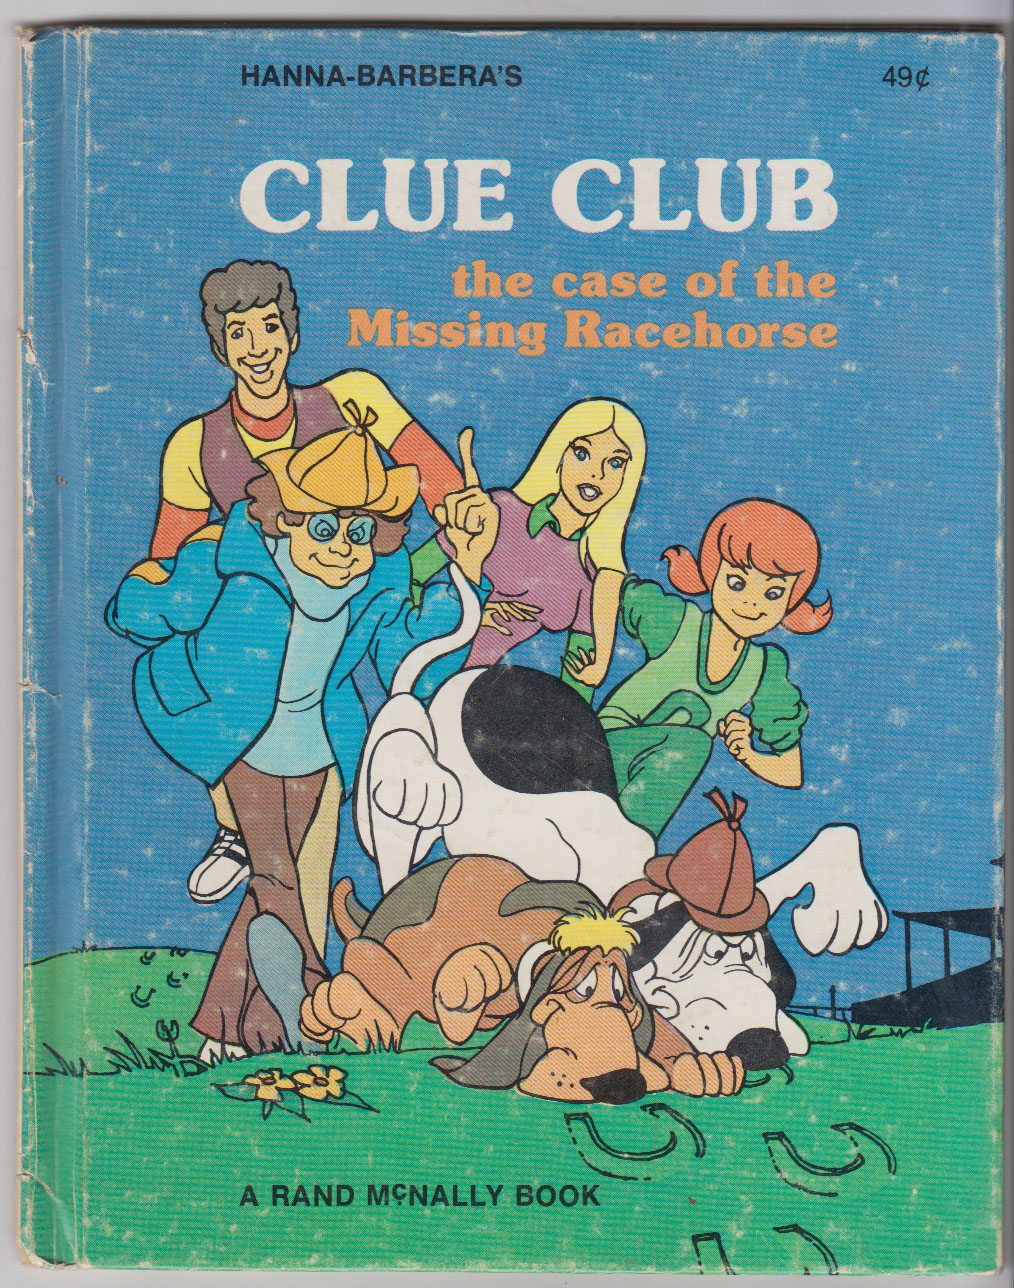 Hanna-Barbera's Clue Club the case of the Missing Racehorse by Brown, Fern  G.: Very Good Hardcover (1977) First Edition. | HORSE BOOKS PLUS LLC